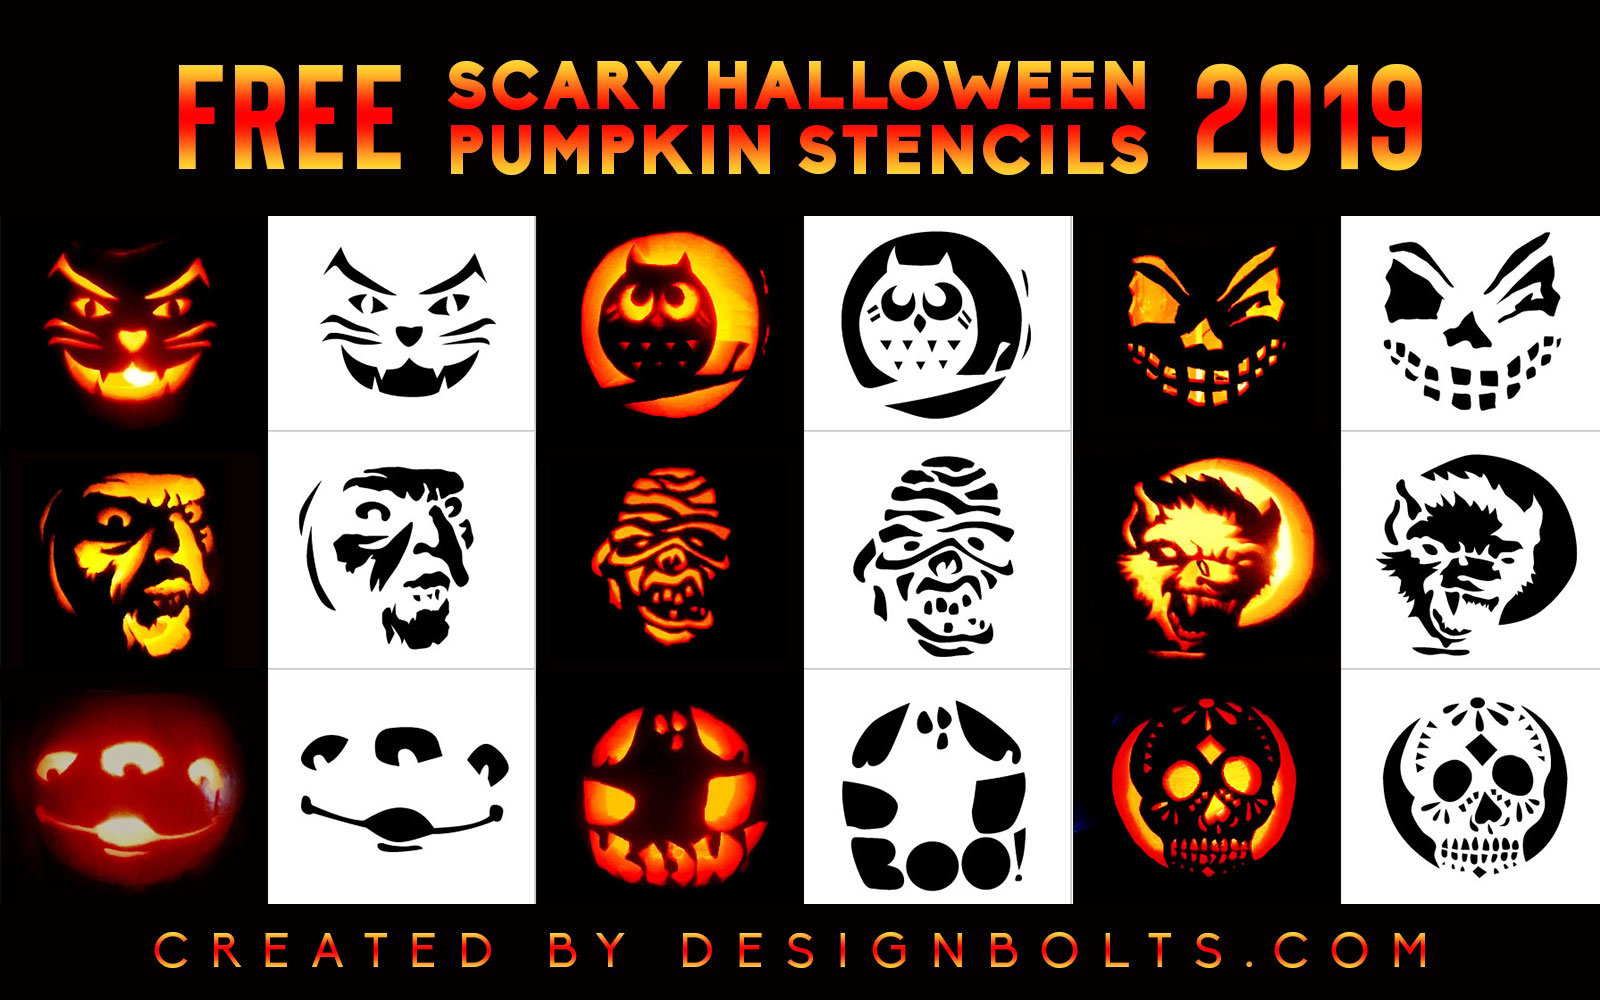 10 Scary Halloween Pumpkin Carving Stencils, Ideas, Patterns for 2019